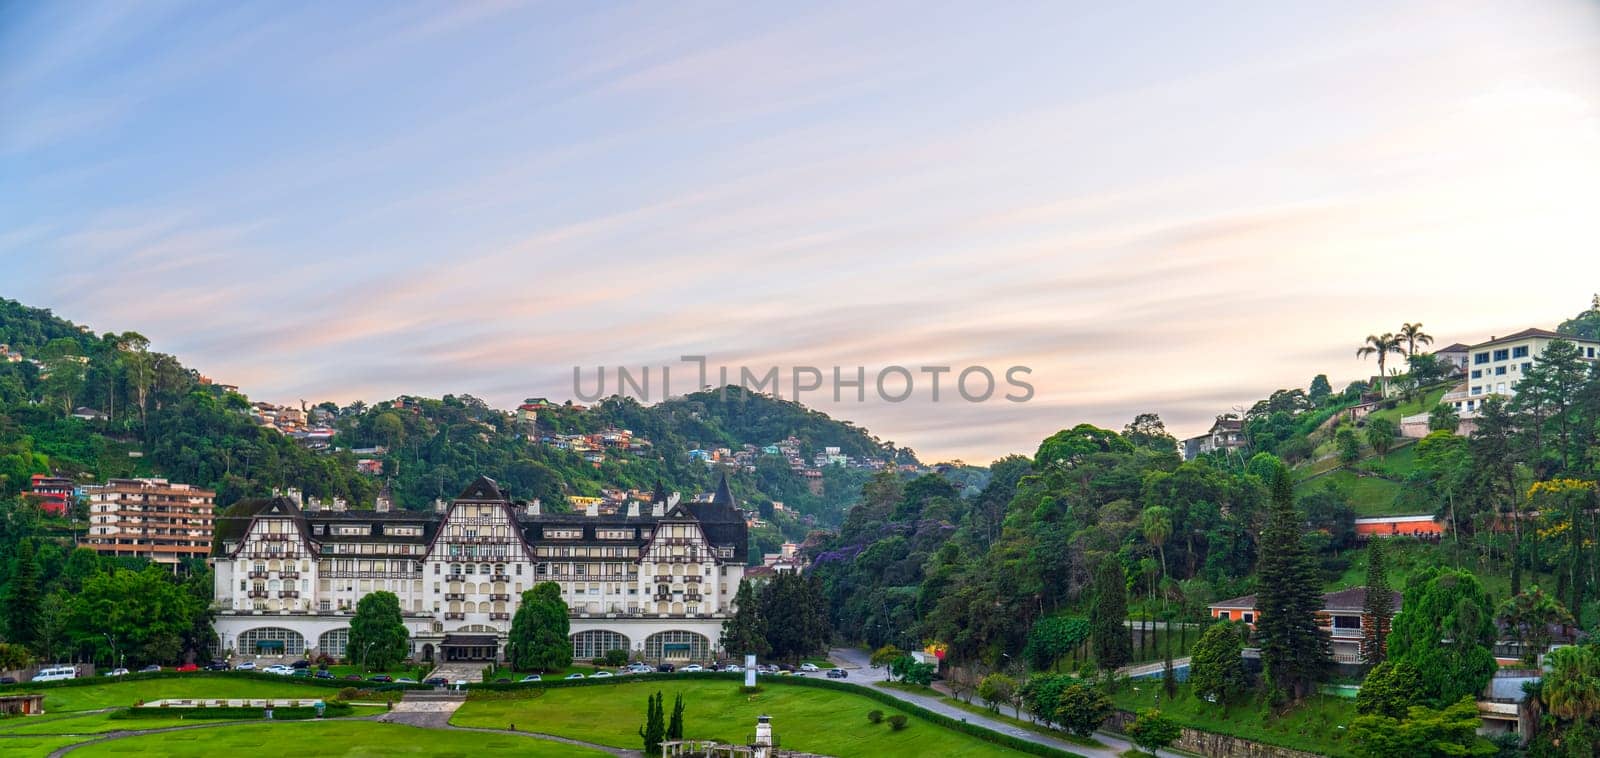 Beautiful Quitandinha Palace under an abstract sky in Petropolis, Brazil by FerradalFCG